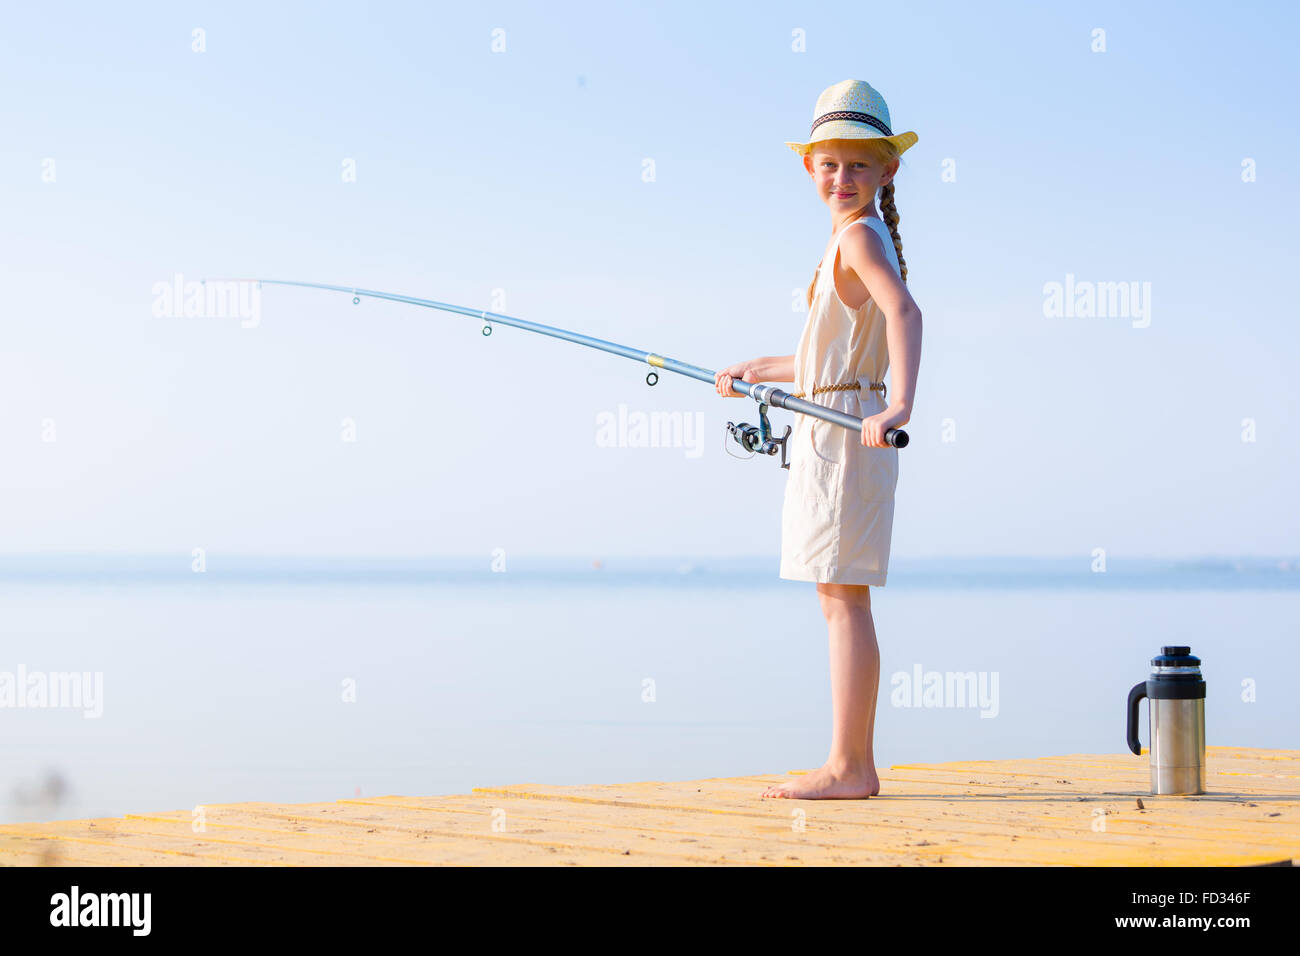 https://c8.alamy.com/comp/FD346F/girl-in-a-dress-and-a-hat-with-a-fishing-rod-fishing-from-the-pier-FD346F.jpg